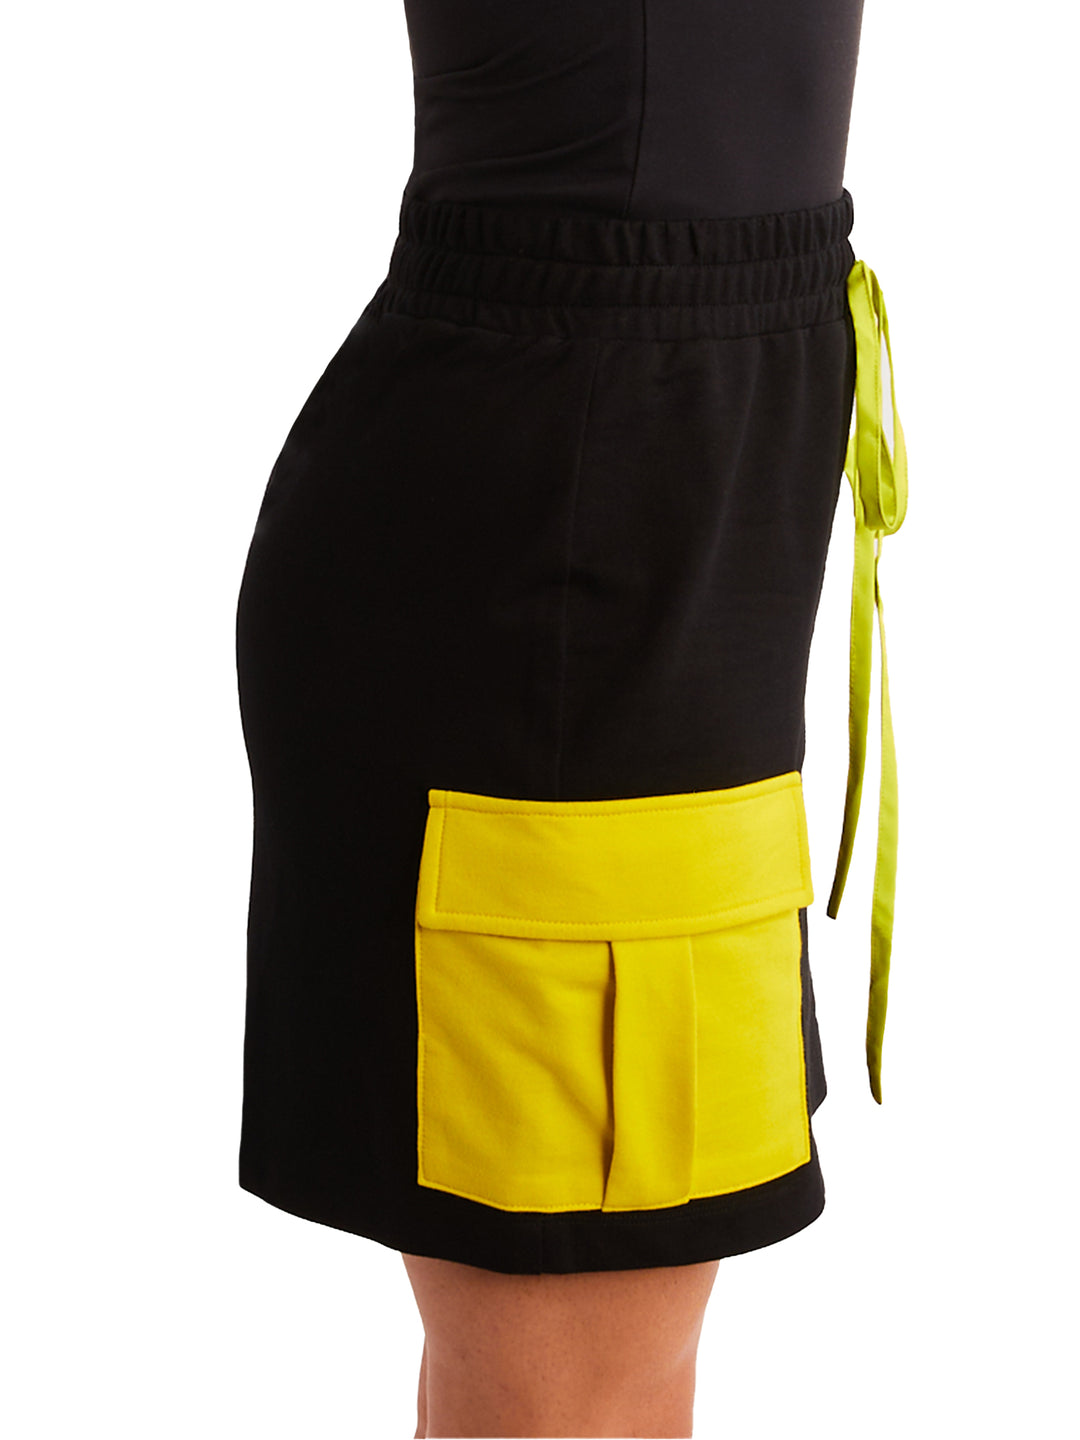 Short Cargo Skirt in Black French Terry Cotton